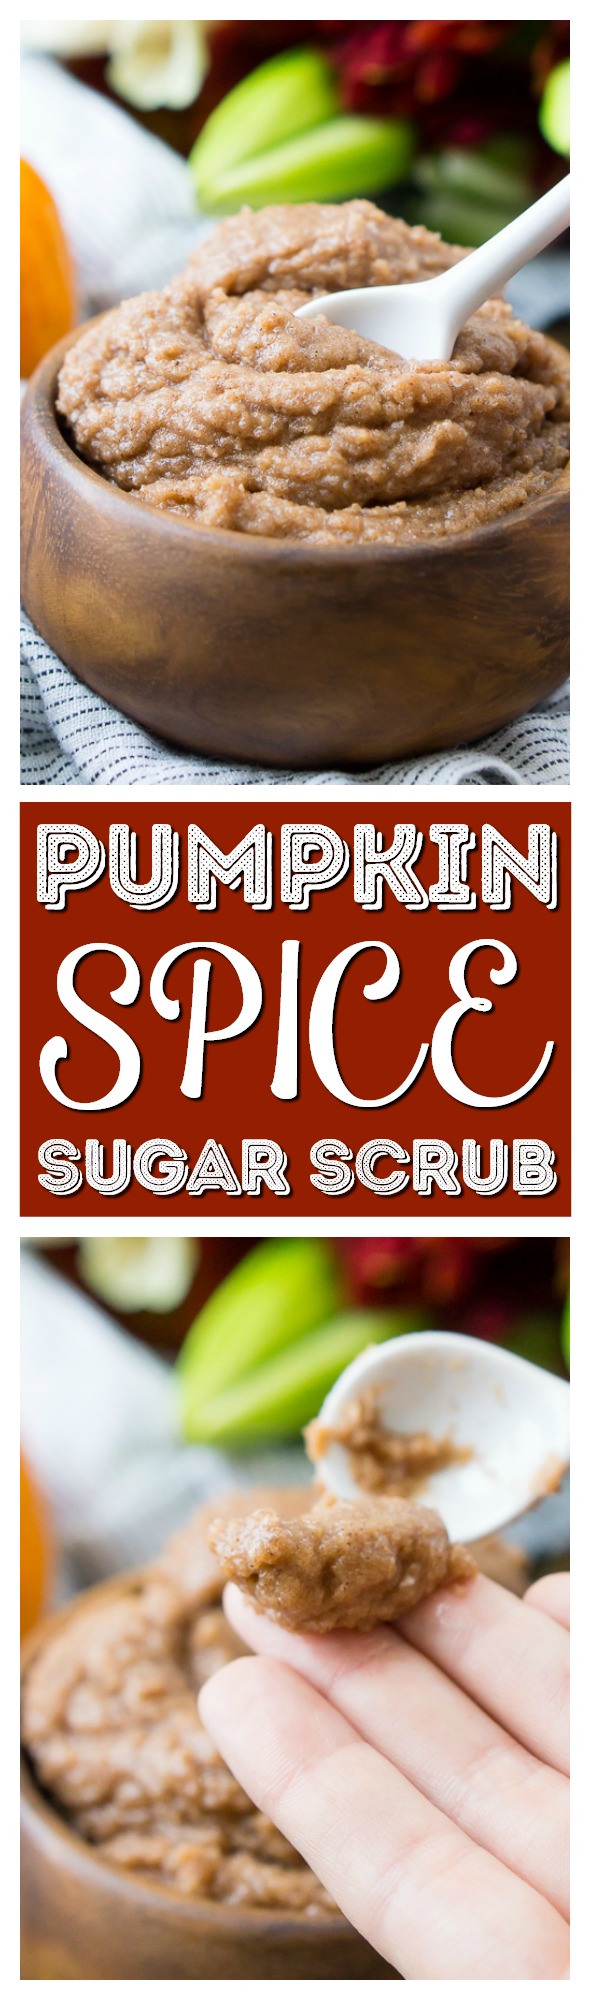 This Pumpkin Spice Sugar Scrub is an easy DIY beauty recipe that will have your skin feeling soft and smelling seasonal! Made with coconut oil, sugar, and spices! via @sugarandsoulco